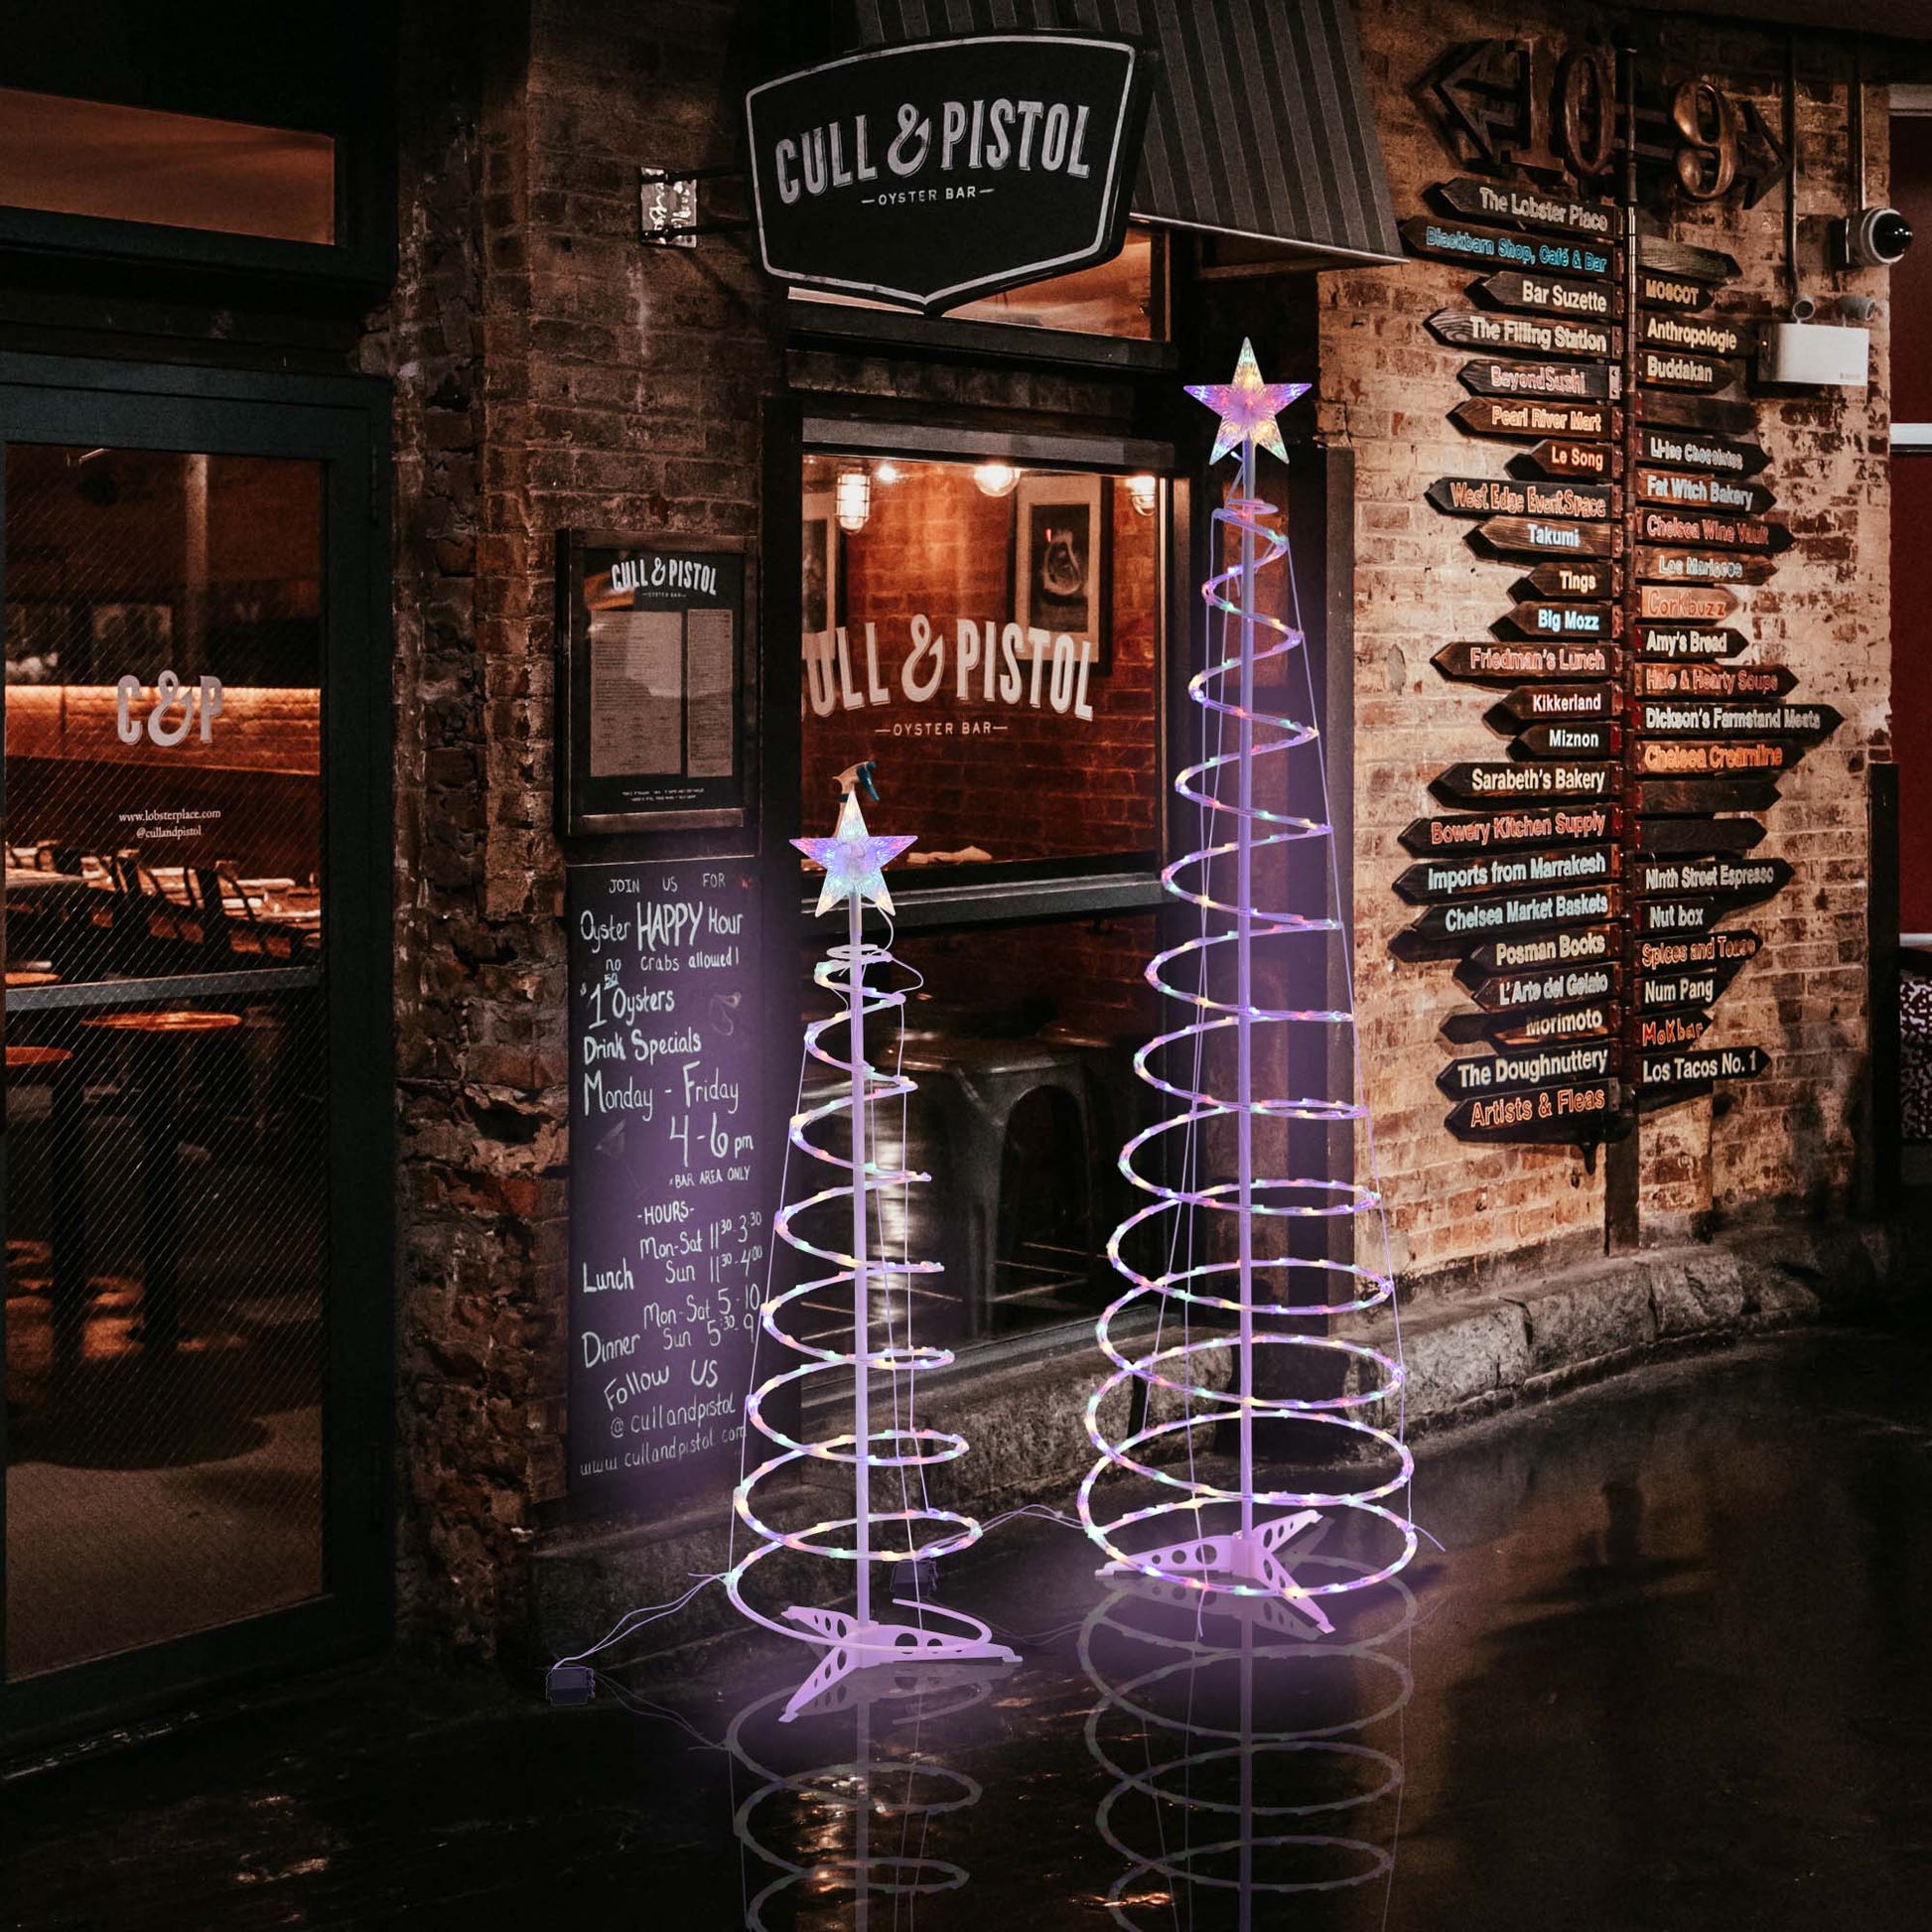 6' LED Spiral Christmas Tree Light Outdoor sculpture with remote control.